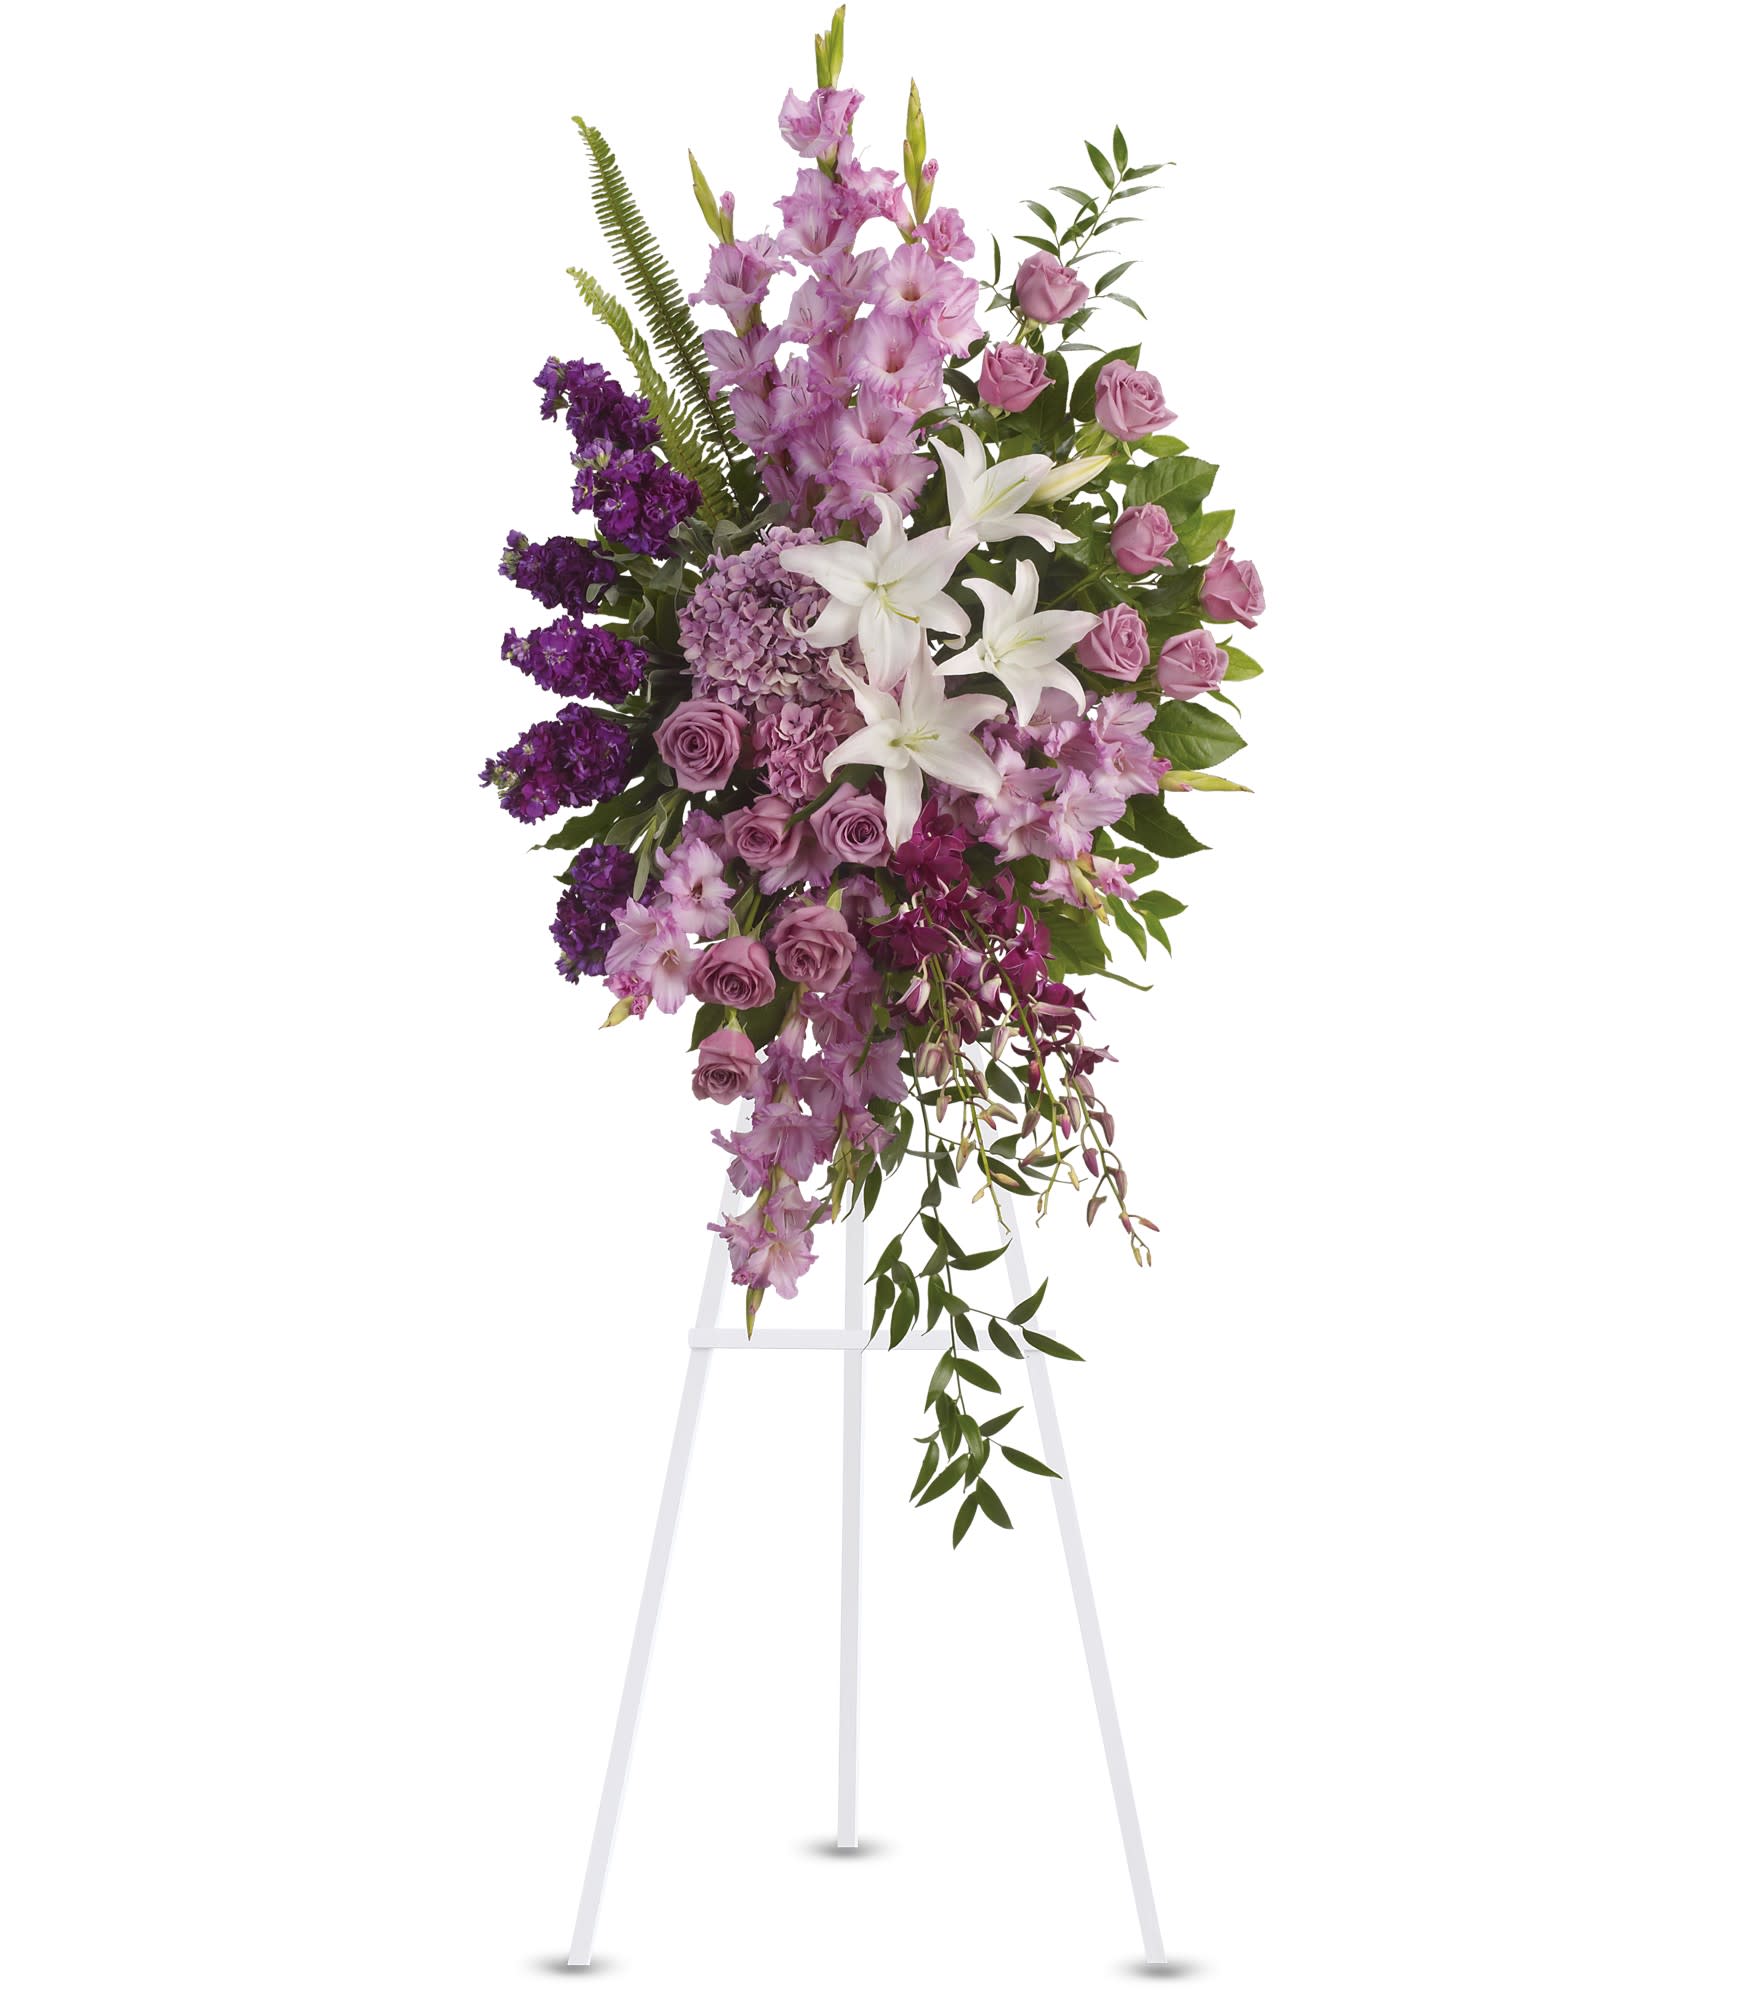 Sacred Garden Spray by Teleflora - A lovely lavender spray of flowers lets you share your compassion, hope and beauty with all. Beautifully simple. Beautifully serene. It's the perfect way to send your sincere sympathy.  